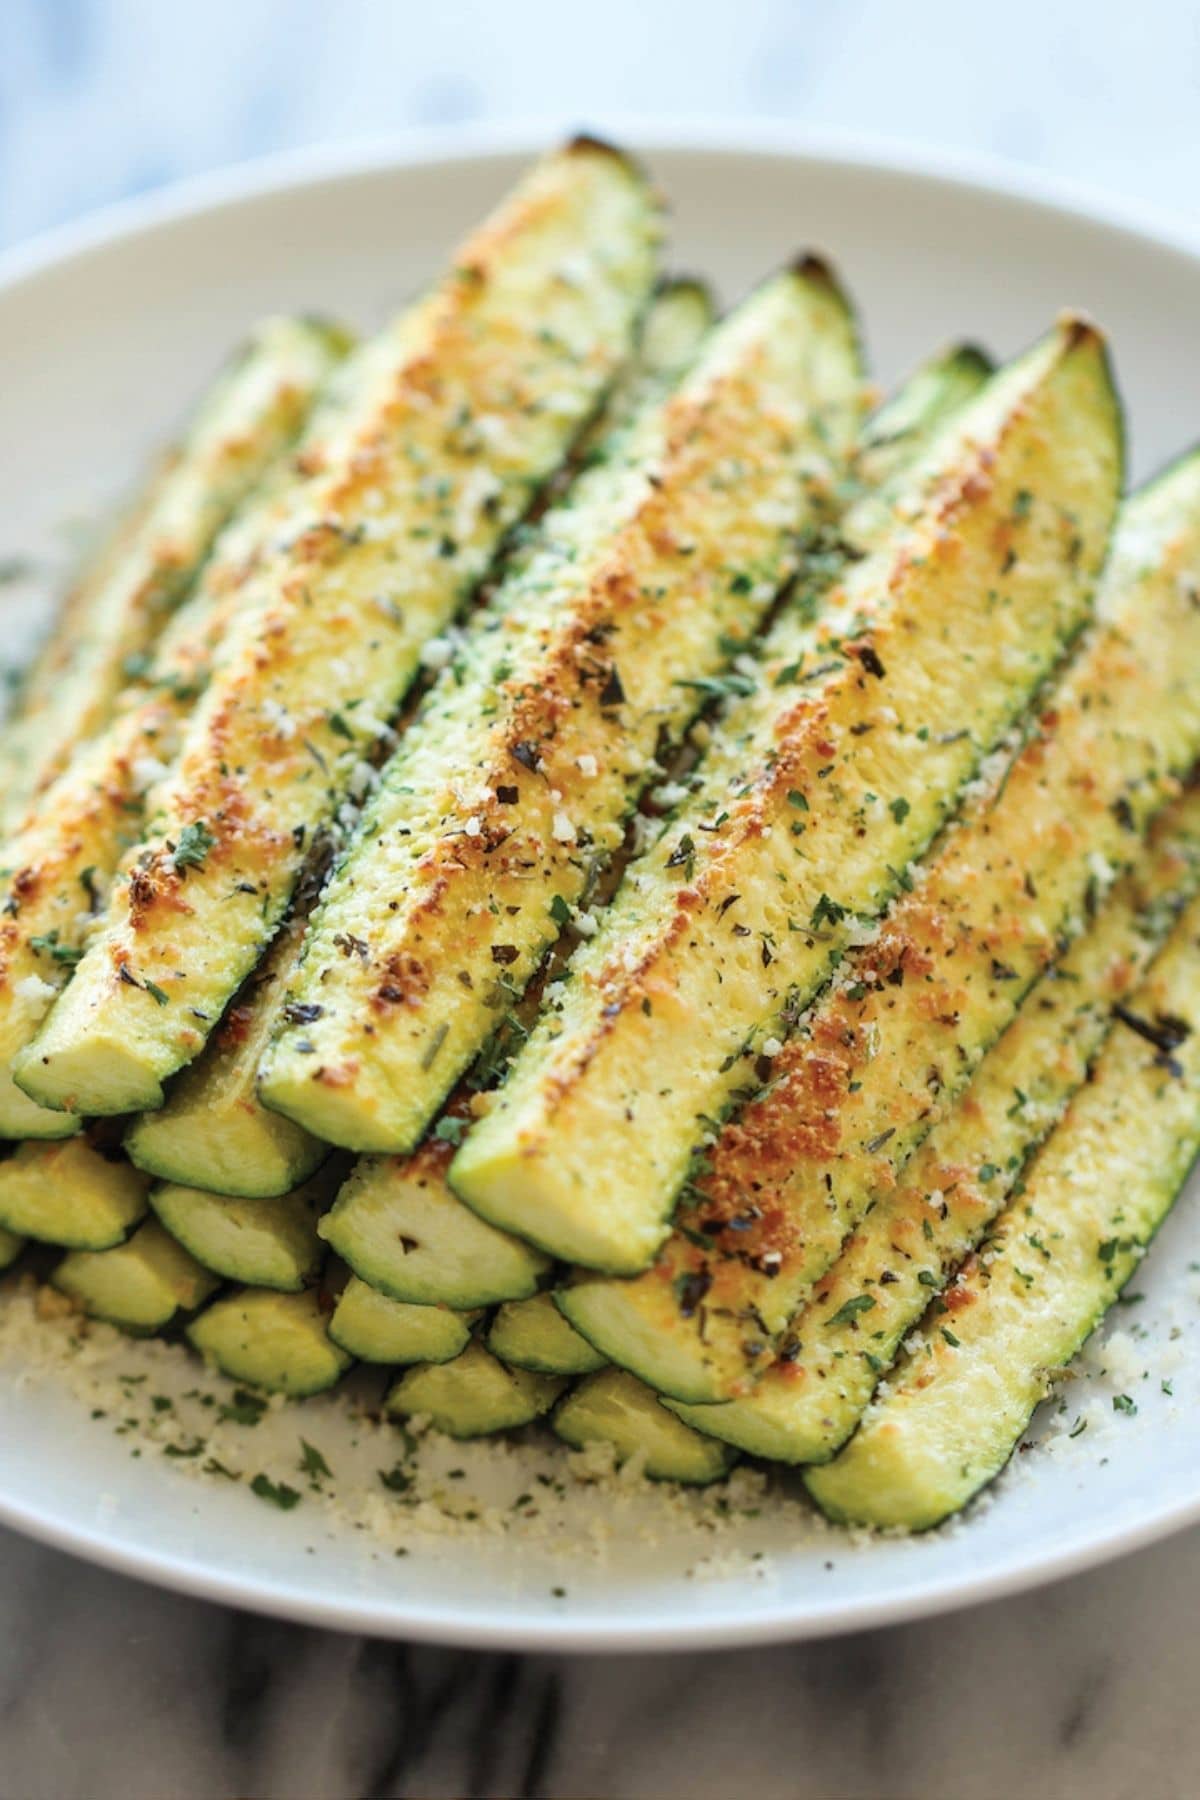 Plate of zucchini spears with parmesan and herbs